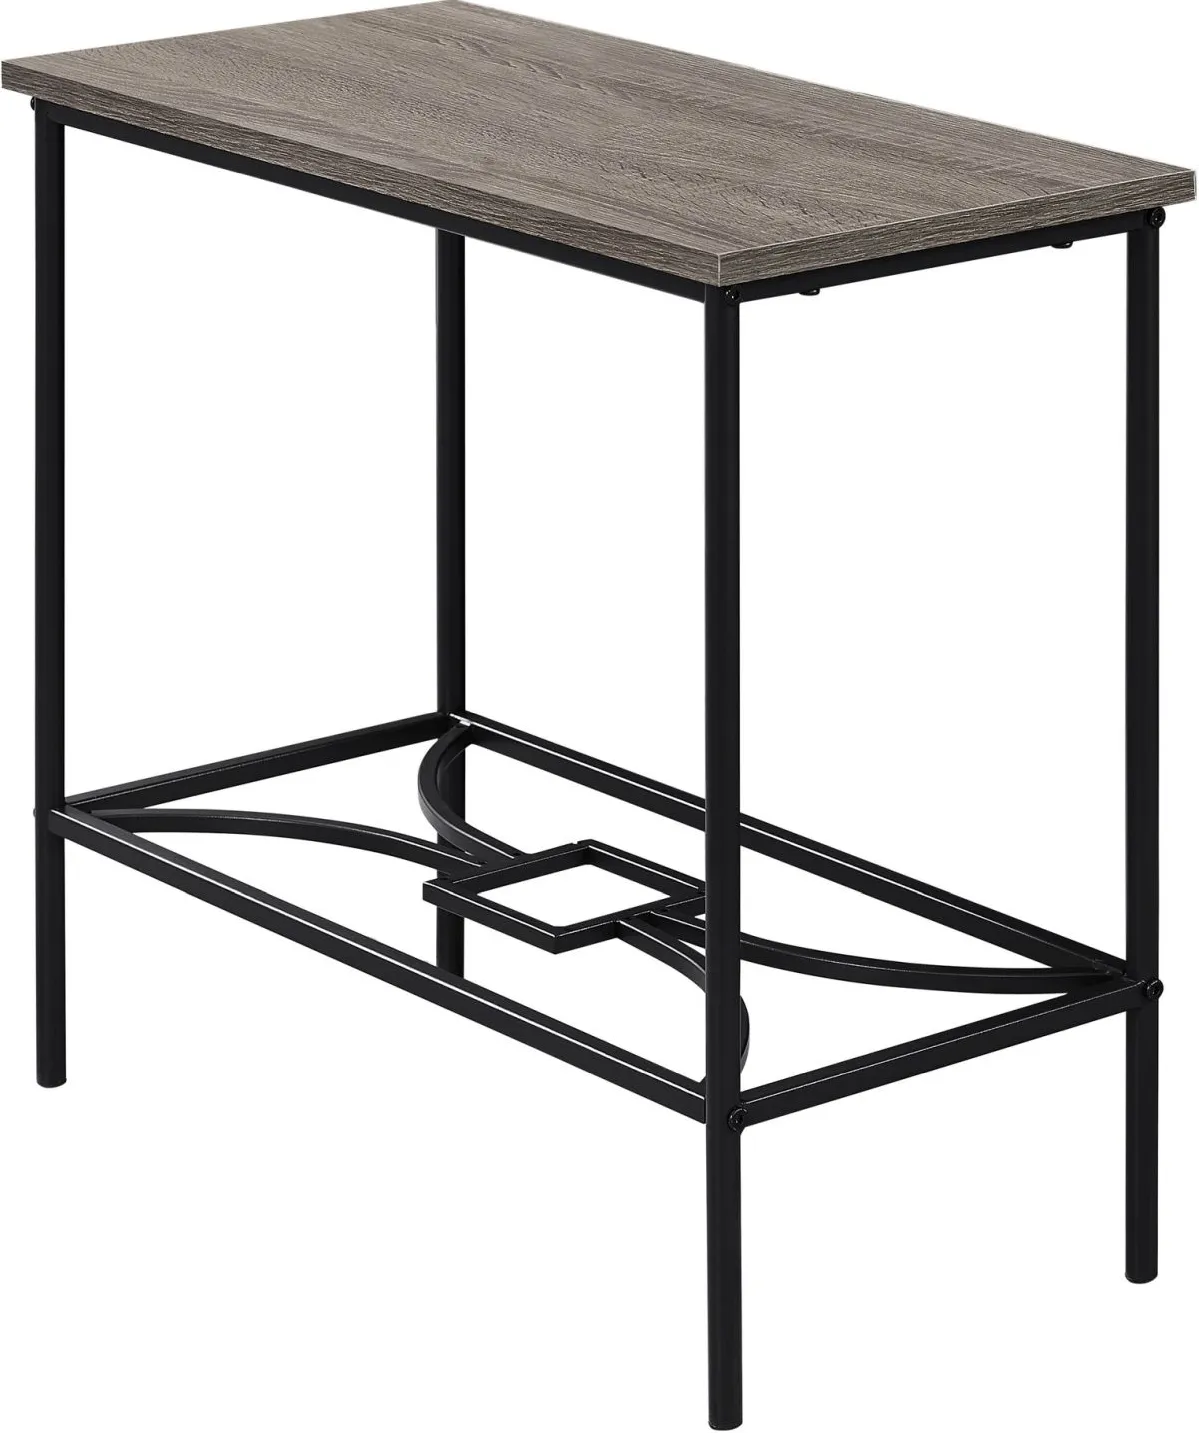 Accent Table, Side, End, Narrow, Small, 2 Tier, Living Room, Bedroom, Metal, Laminate, Brown, Black, Contemporary, Modern